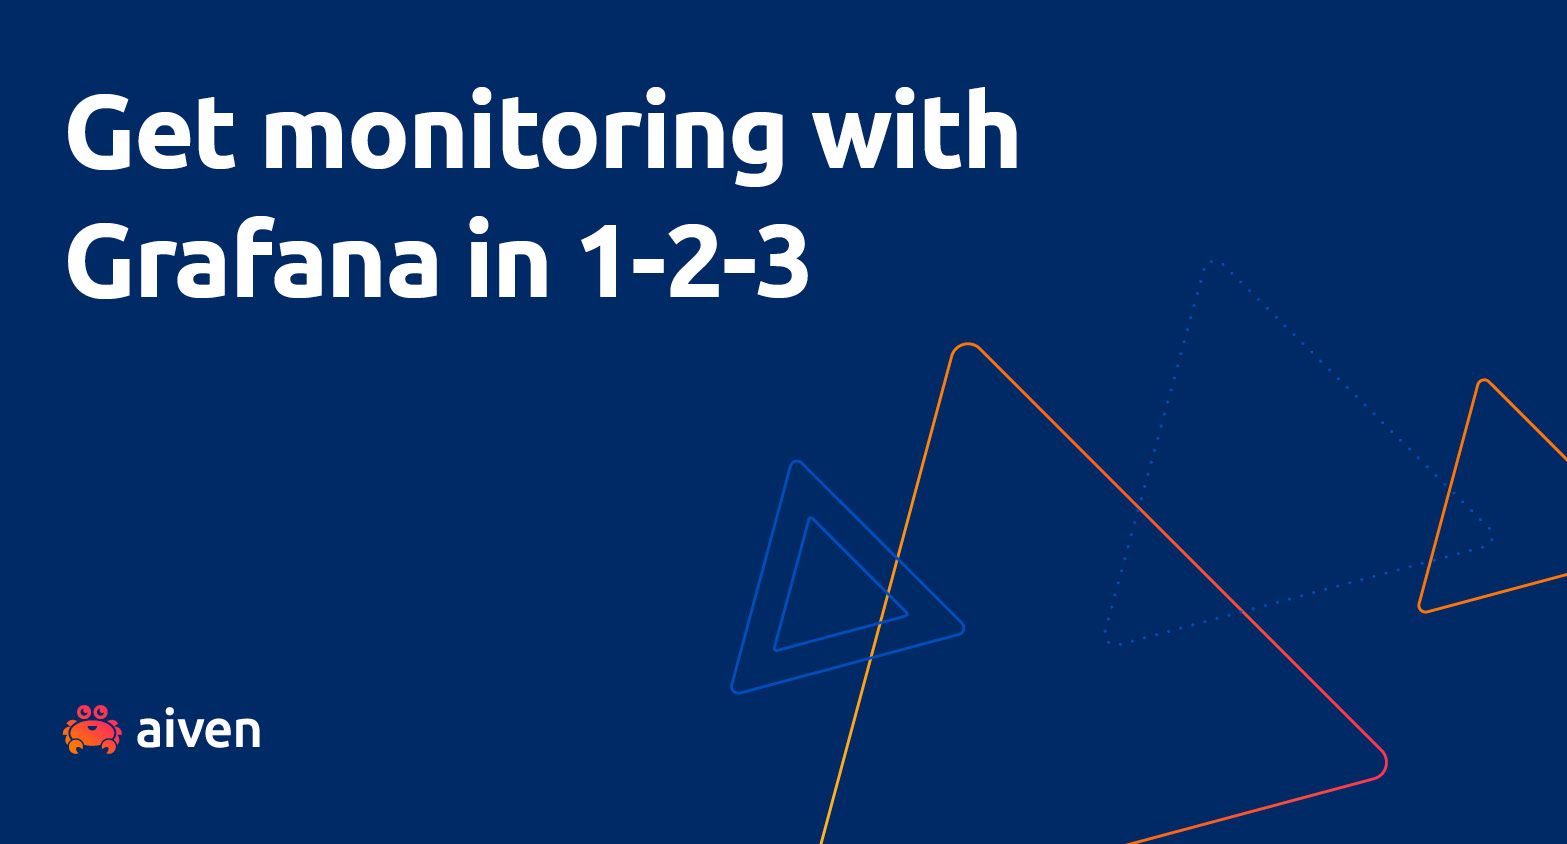 Get monitoring with Grafana in 1-2-3